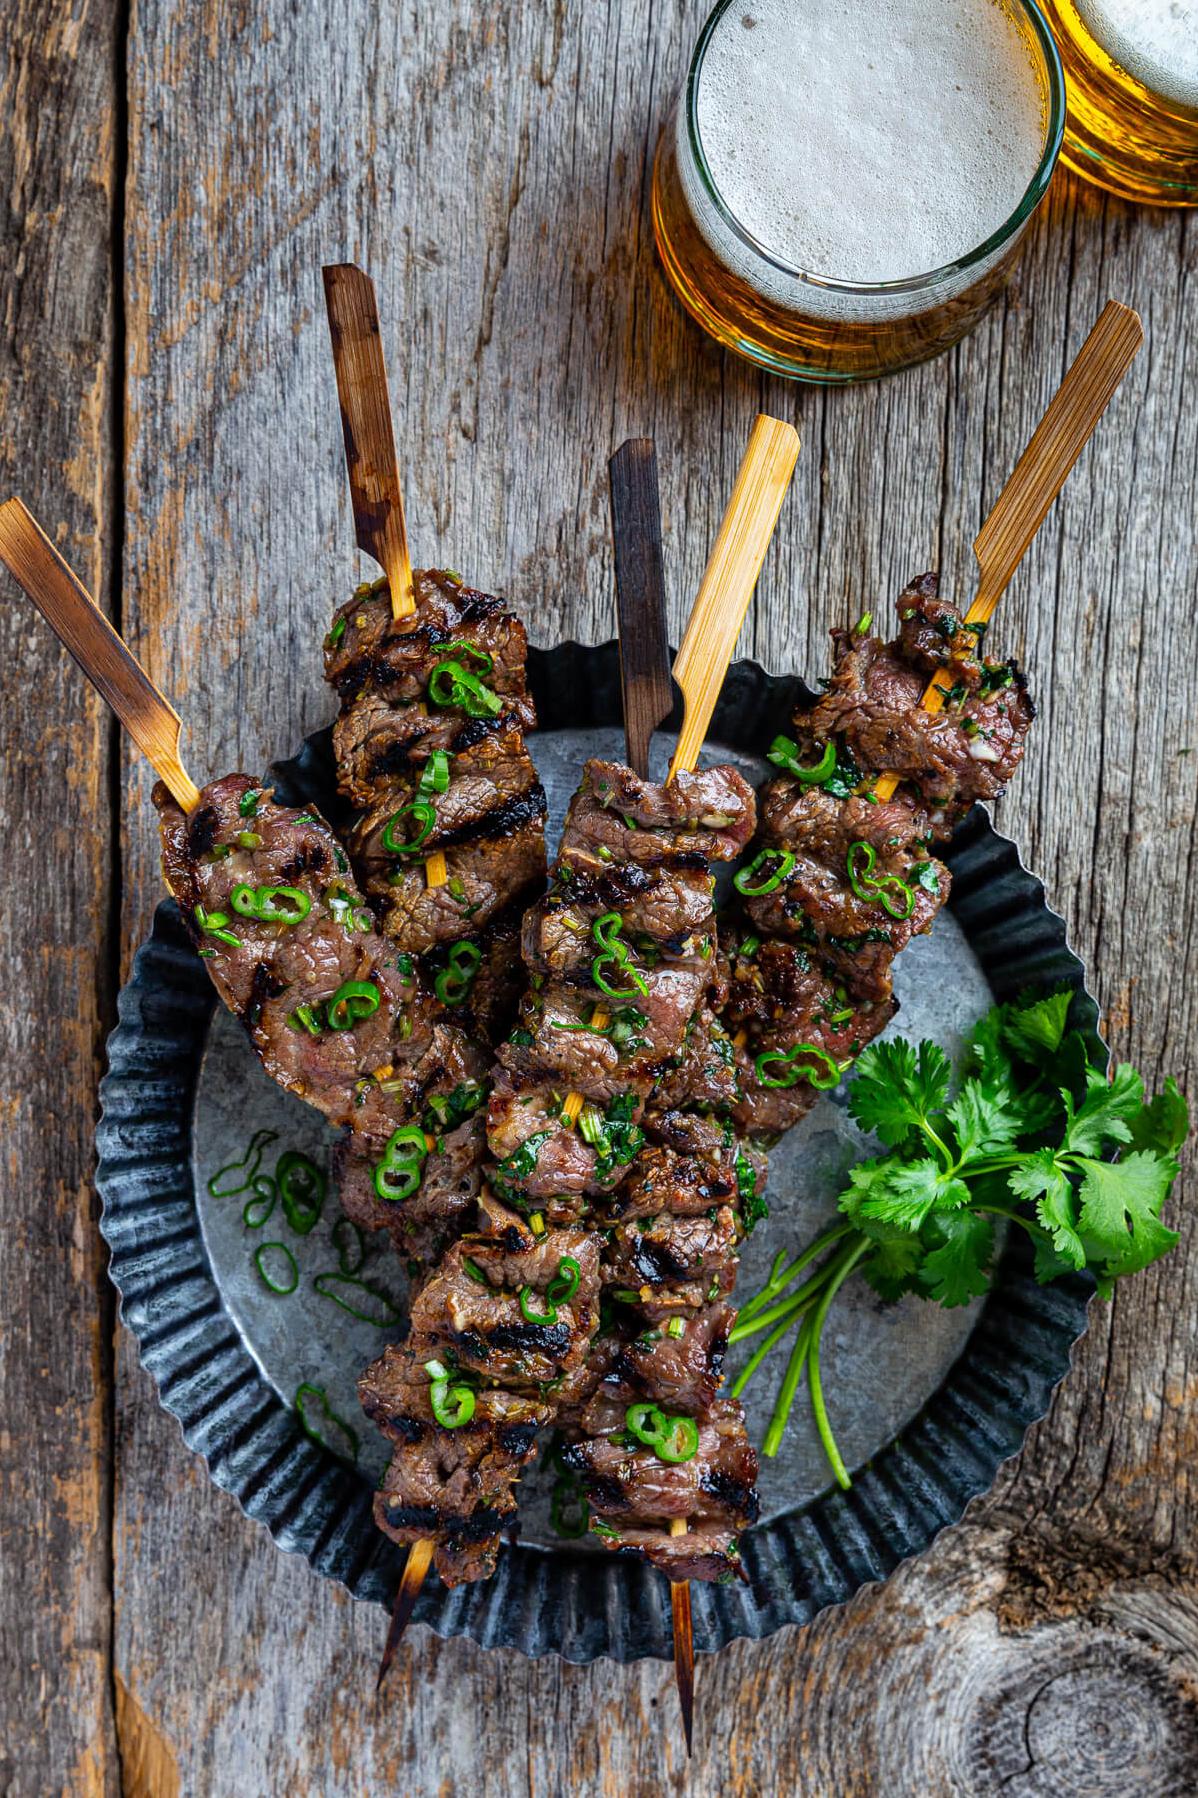  These skewers are packed with flavor and perfect for summer BBQs.